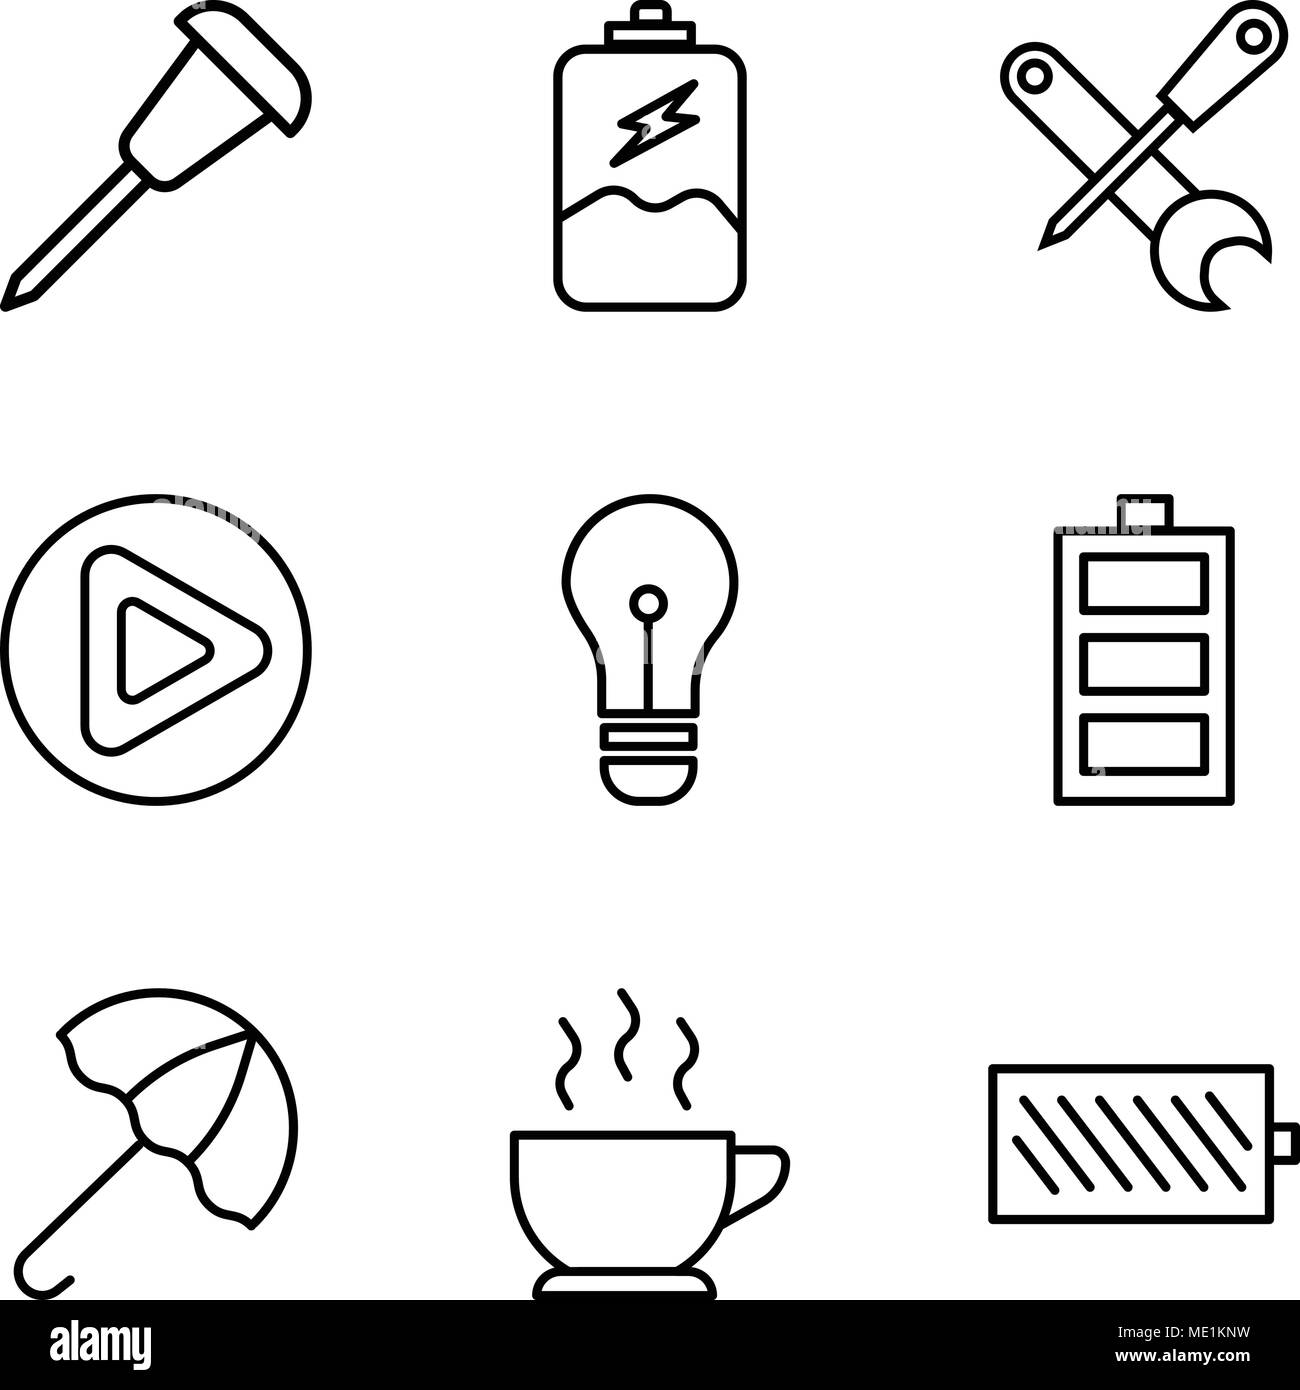 Set Of 9 simple editable icons such as Battery level, Cup of hot coffee, Open umbrella, Battery level, Light bulb, Play button, Screwdriver and wrench Stock Vector